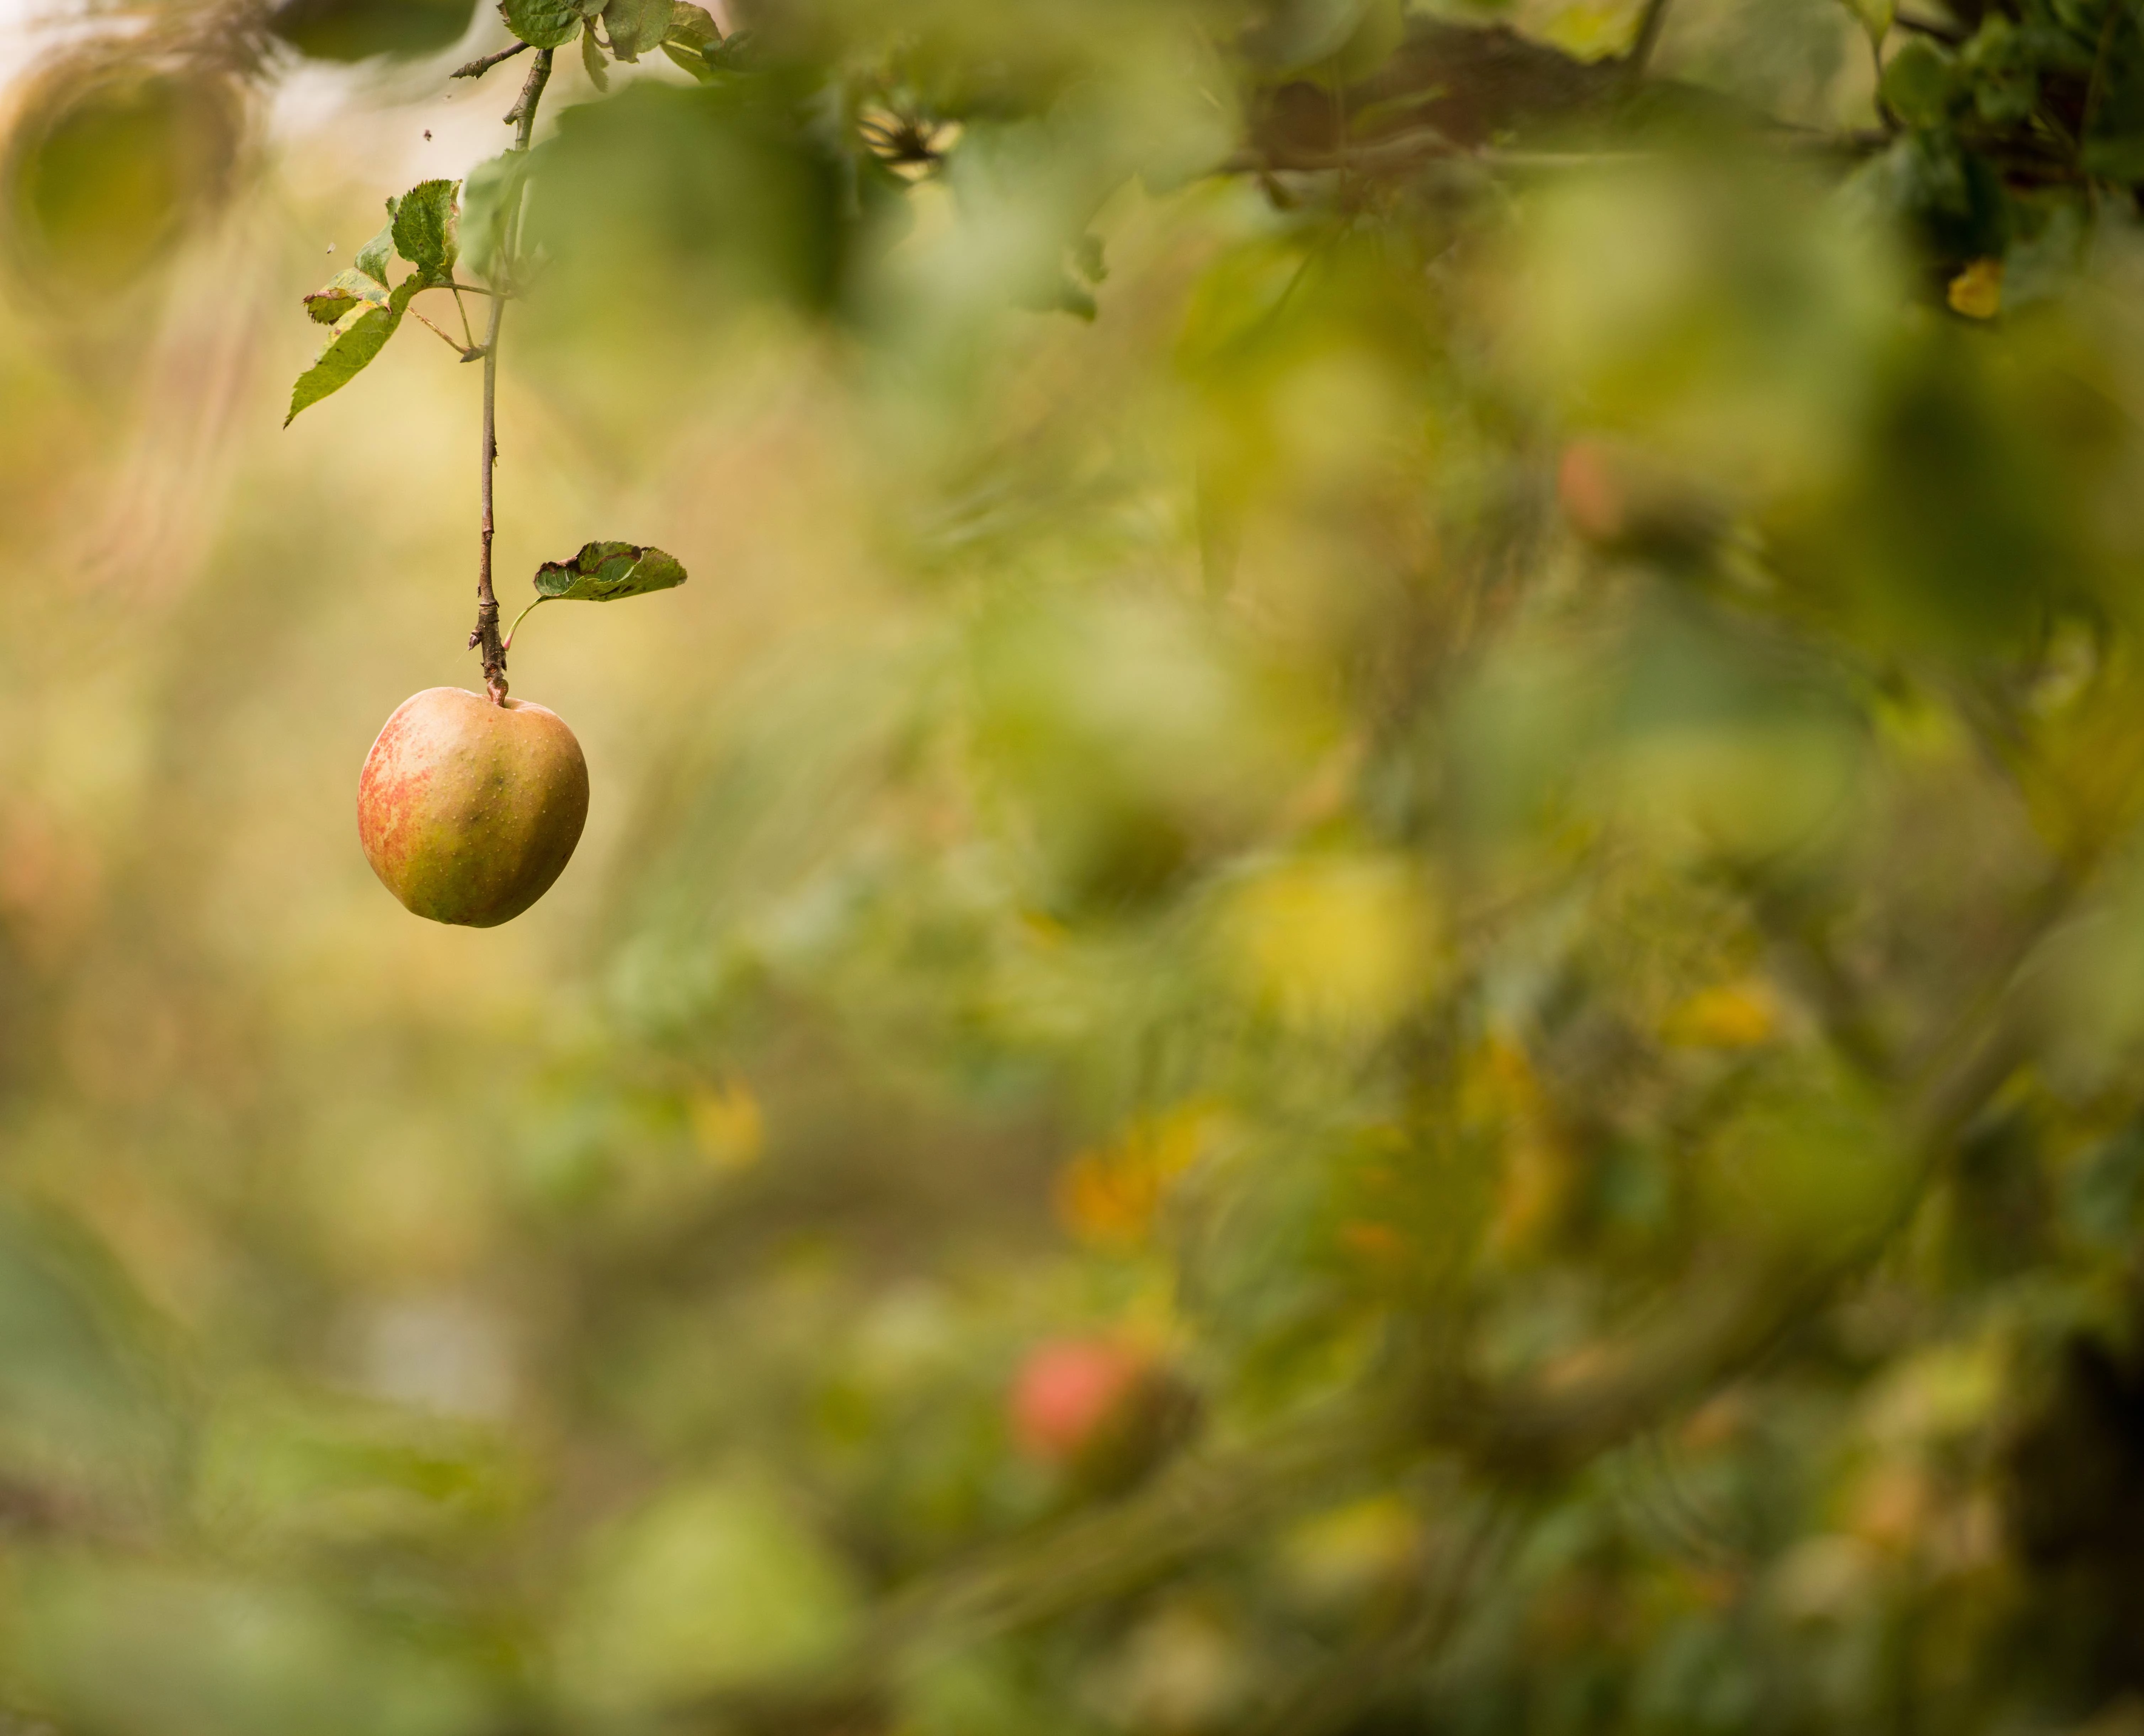 r75-single-ripe-apple-hanging-from-a-tree-ready-for-pickingstokpicsmaller-15627128434817.jpg